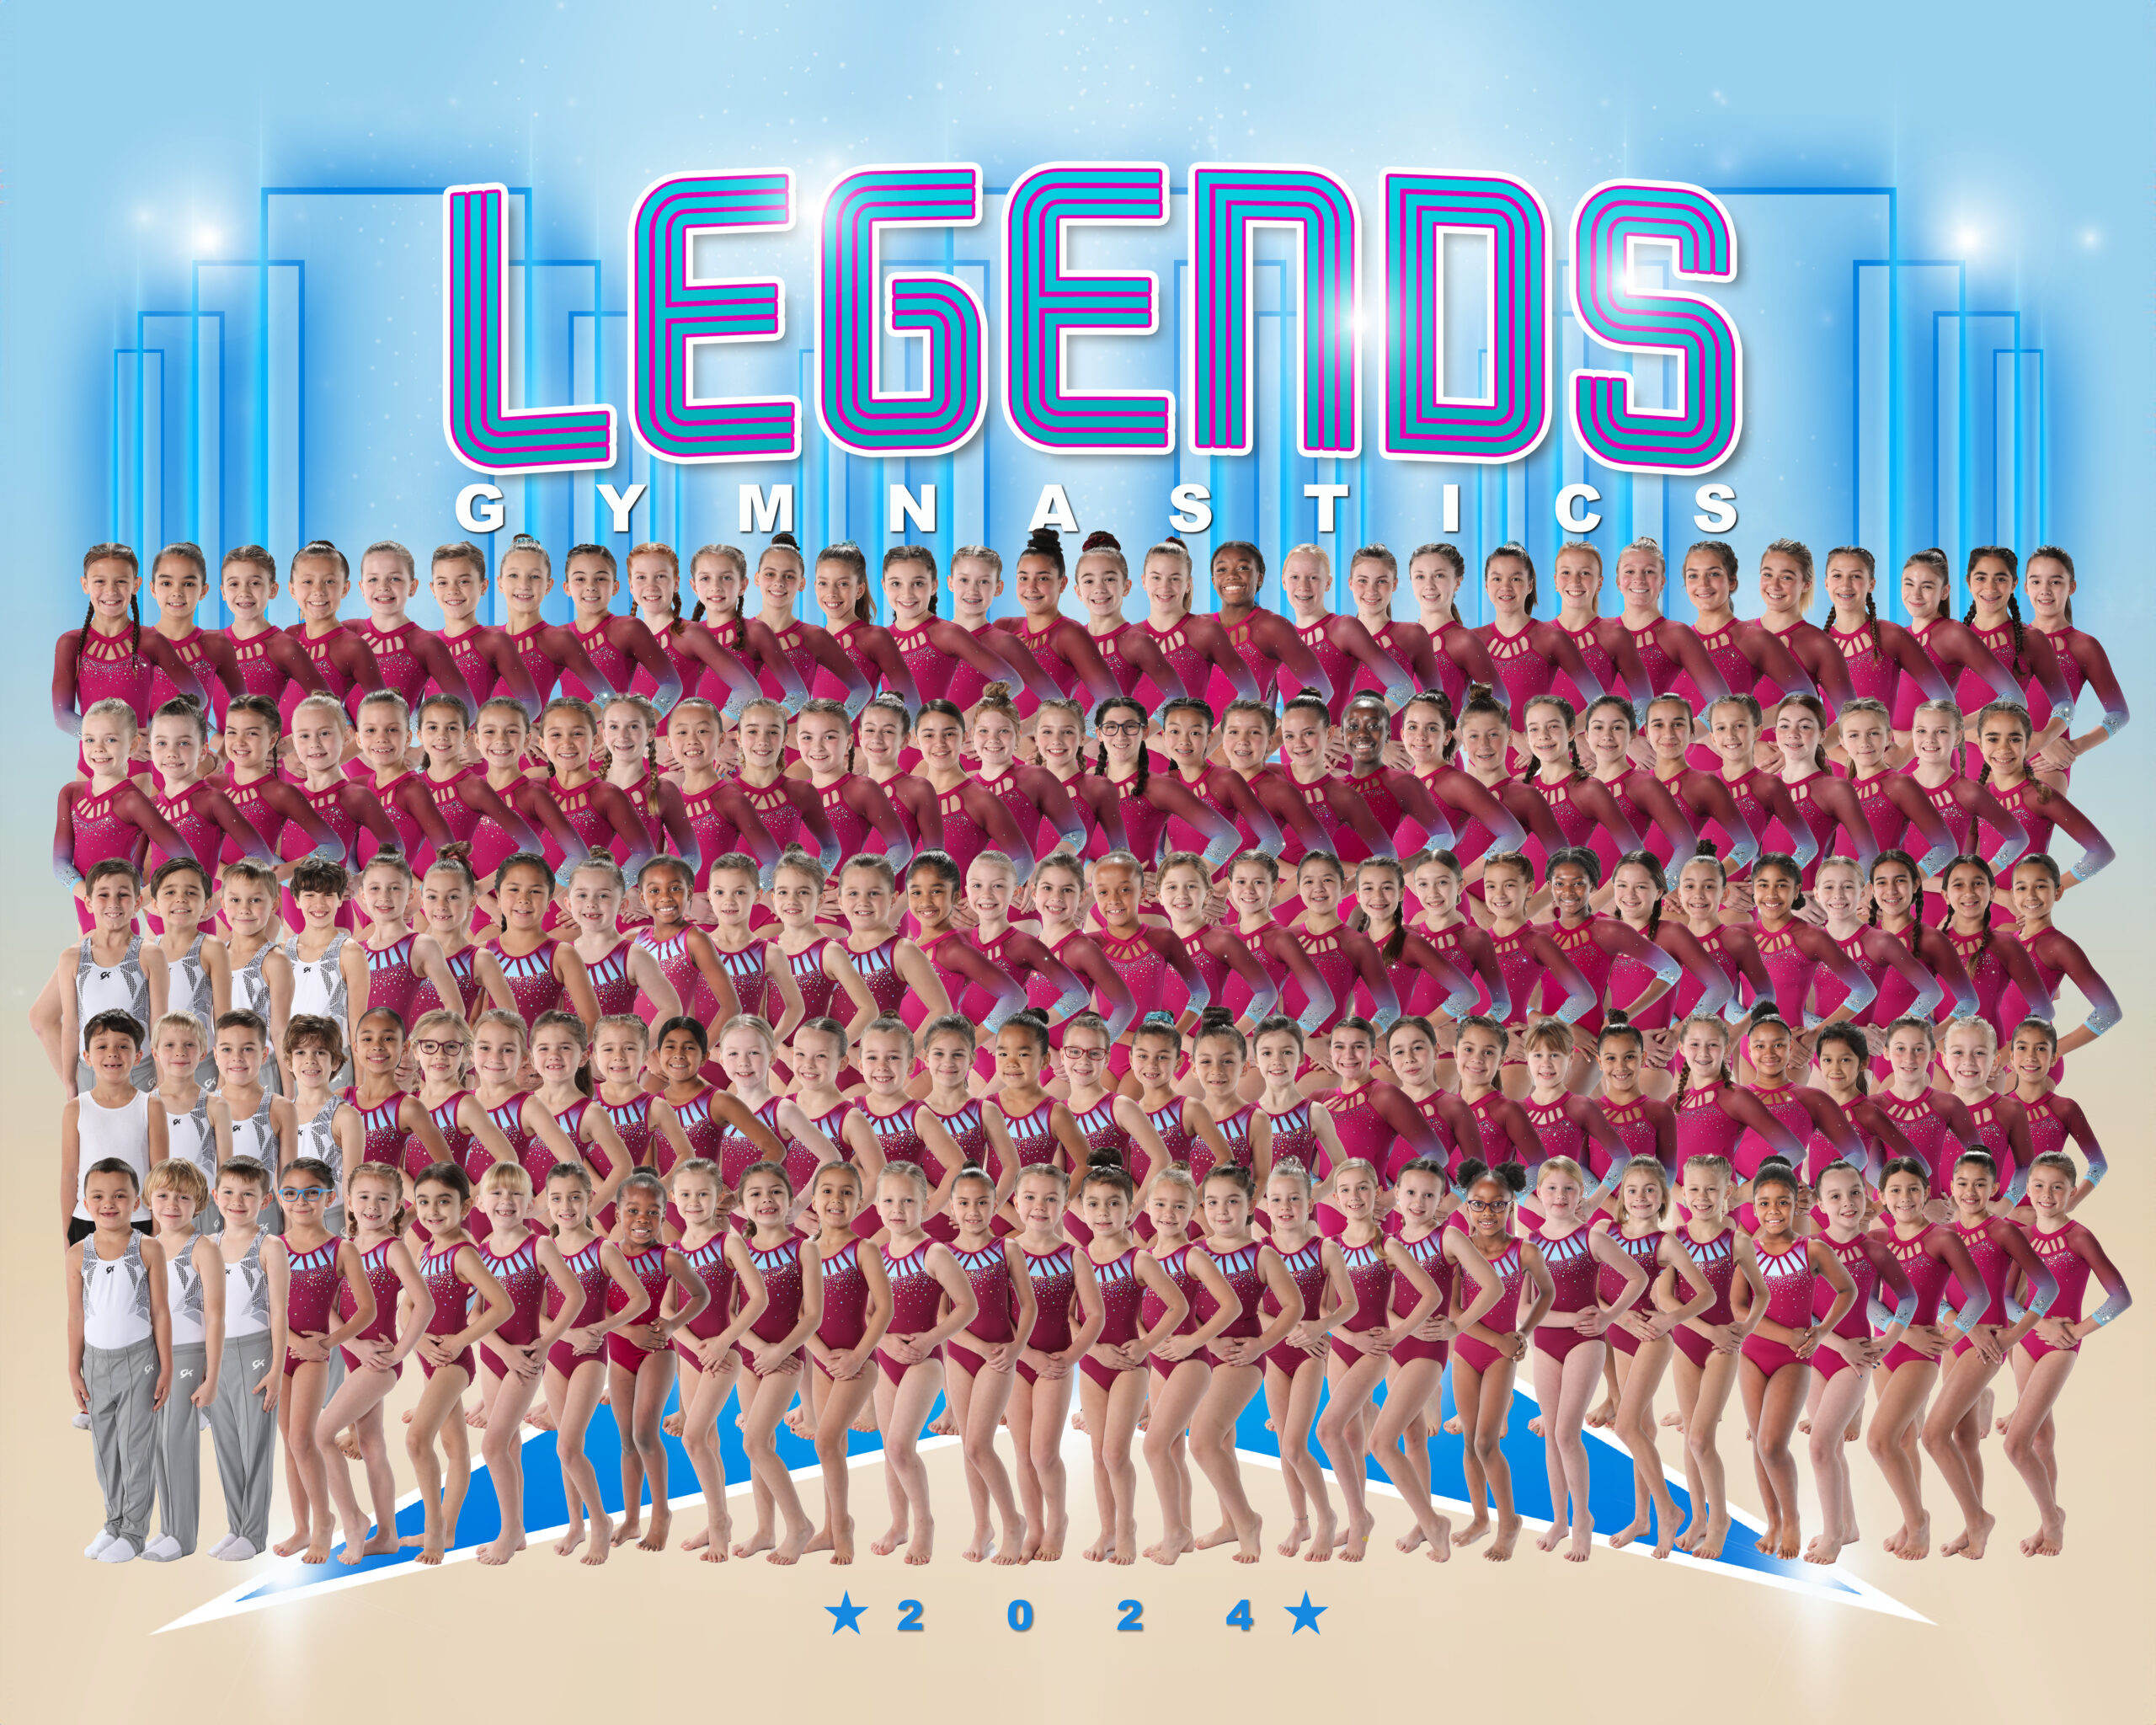 Competitive Team photo at Legends Gymnastics in North Andover, MA.